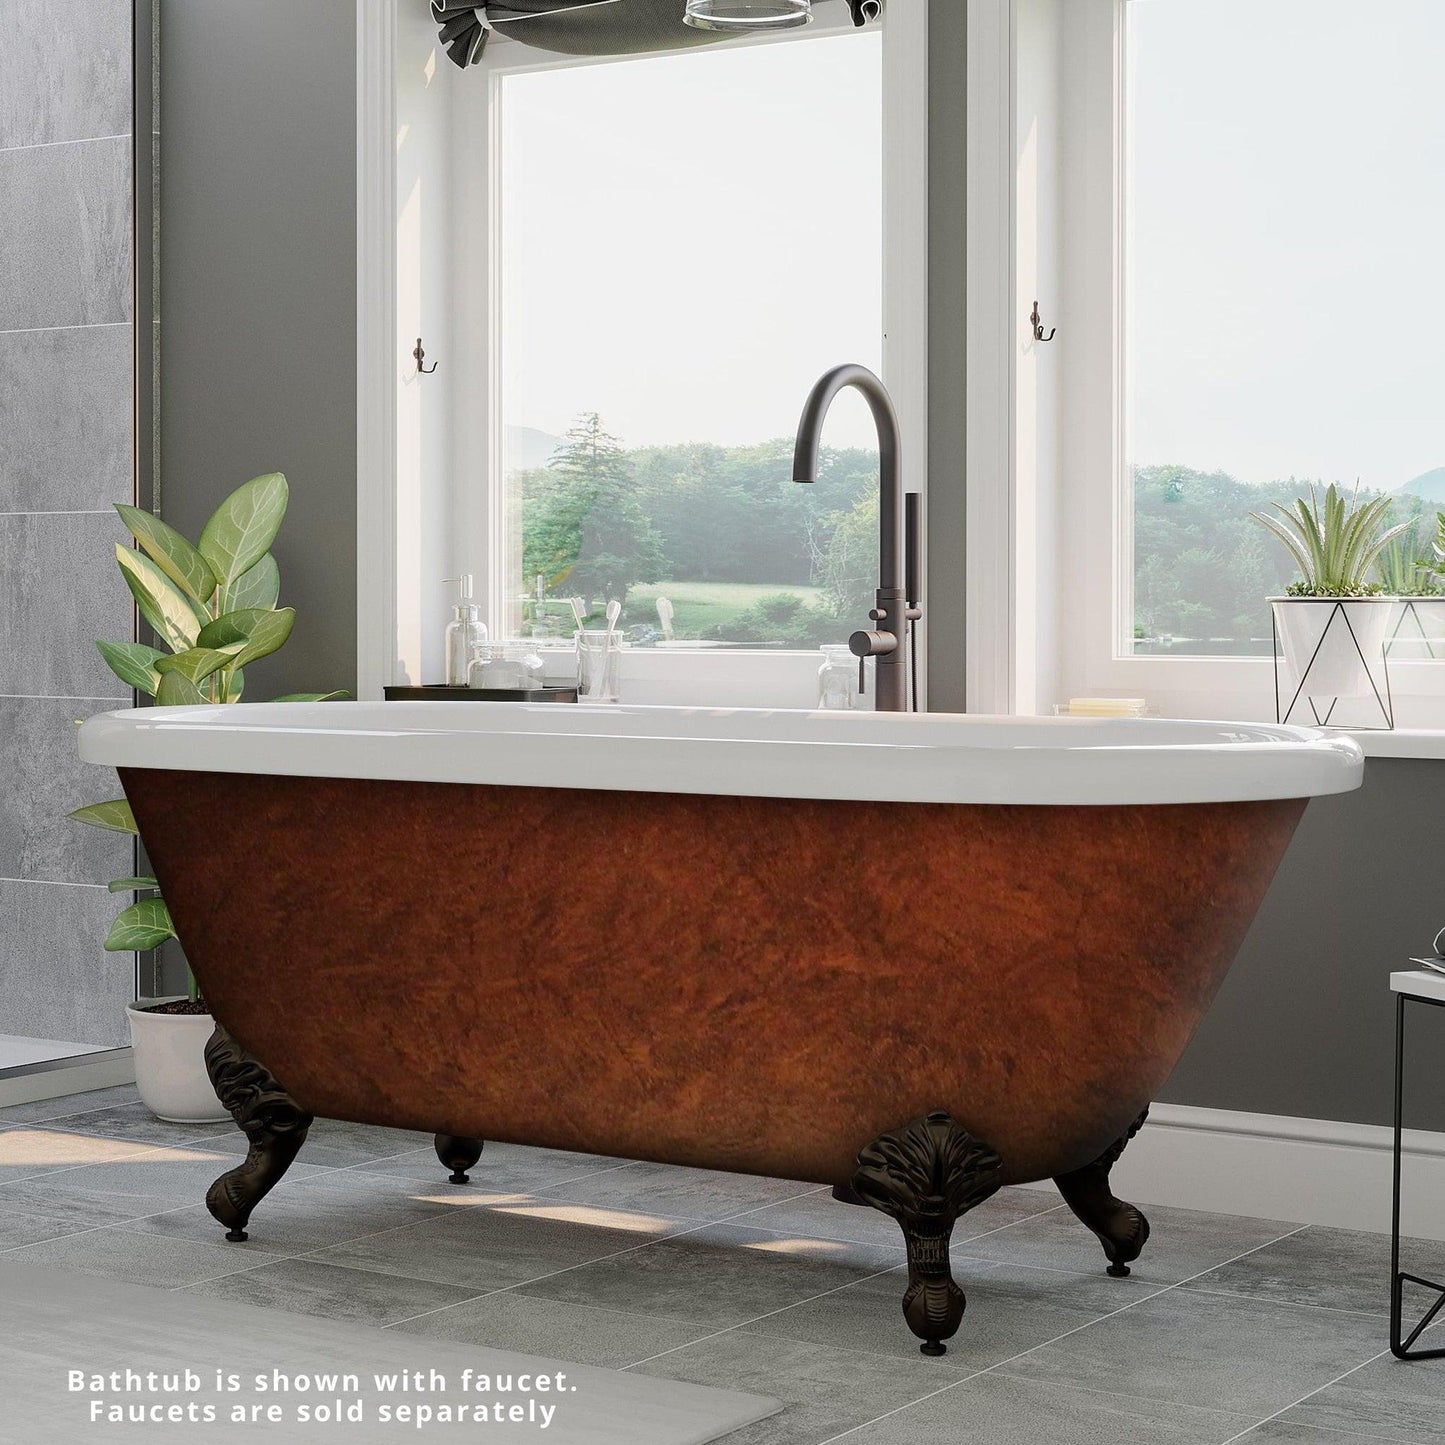 Cambridge Plumbing 60" Hand Painted Copper Bronze Acrylic Double Ended Clawfoot Bathtub With No Faucet Holes With Oil Rubbed Bronze Clawfeet